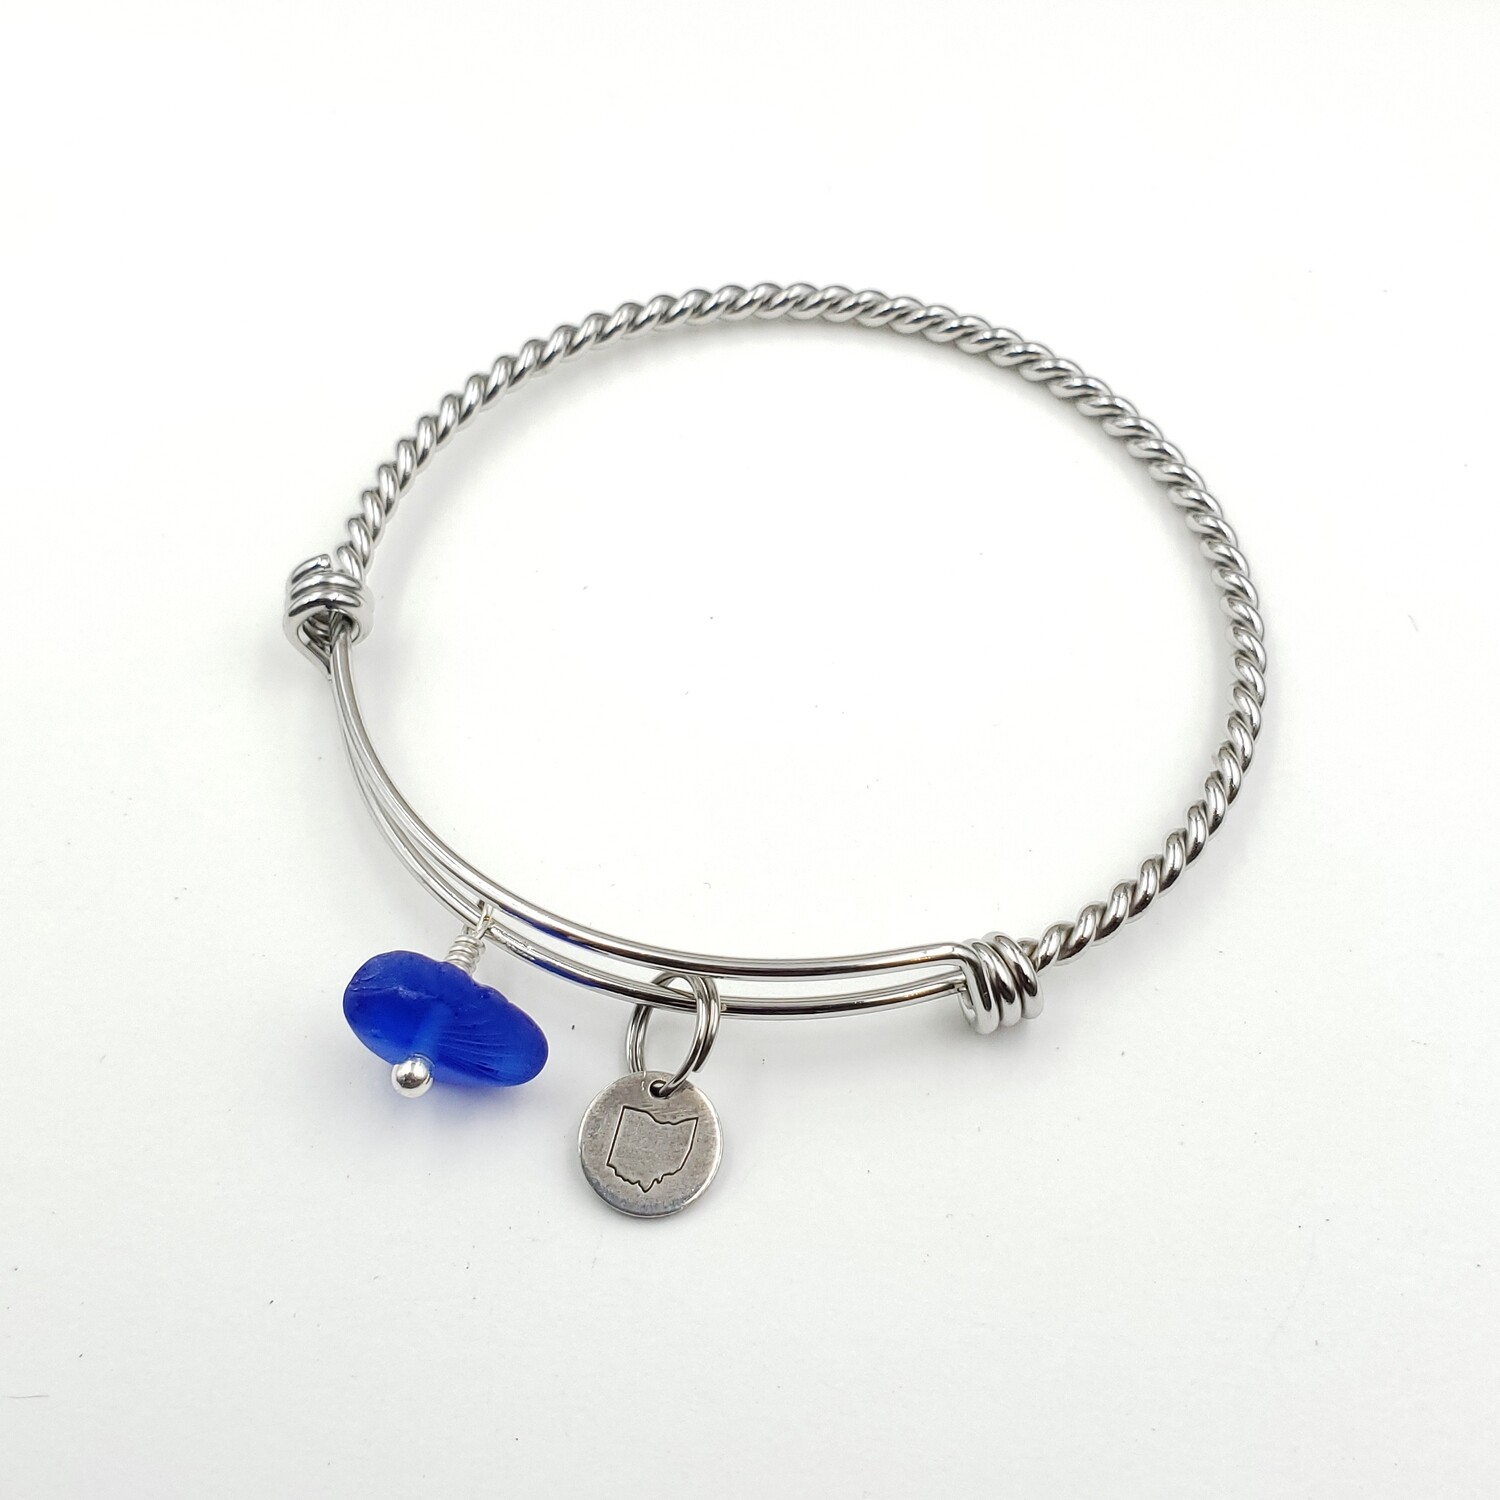 Twisted Bangle Bracelet with Stamped State of Ohio Charm and Cobalt Blue Lake Erie Beach Glass